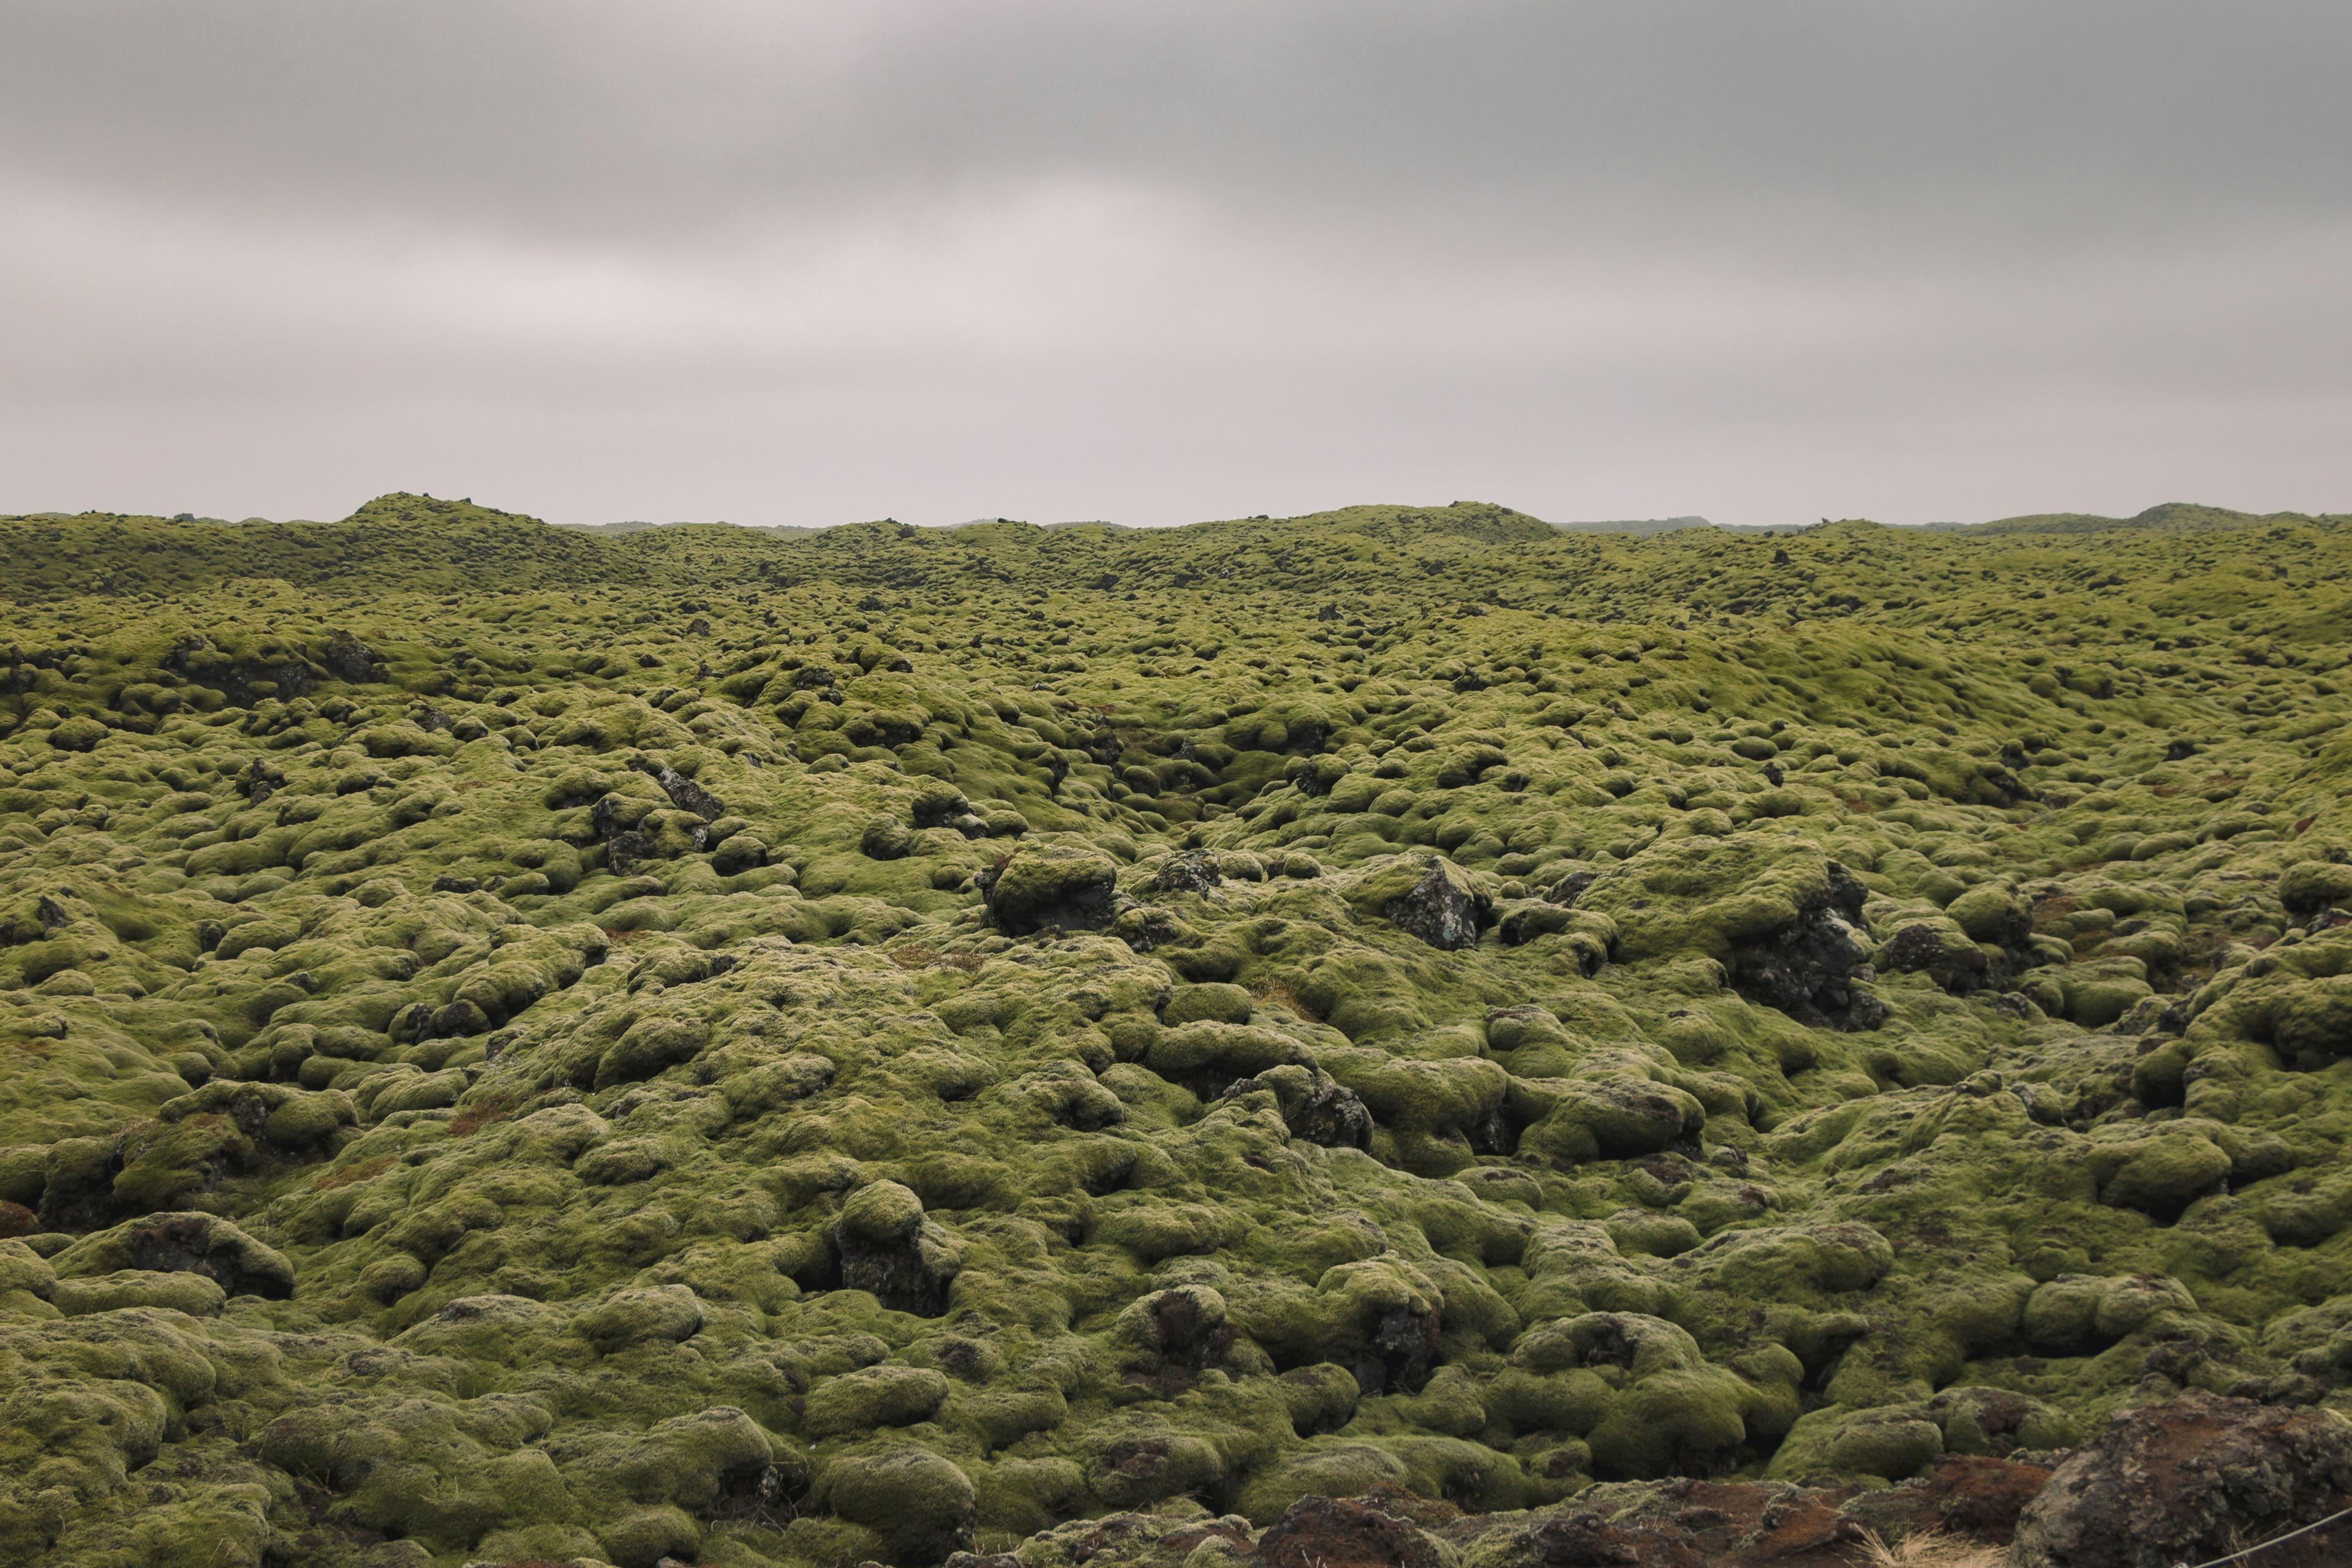 A vast expanse of rolling lava fields blanketed by a thick, green moss under an overcast sky, creating a soft, undulating landscape.